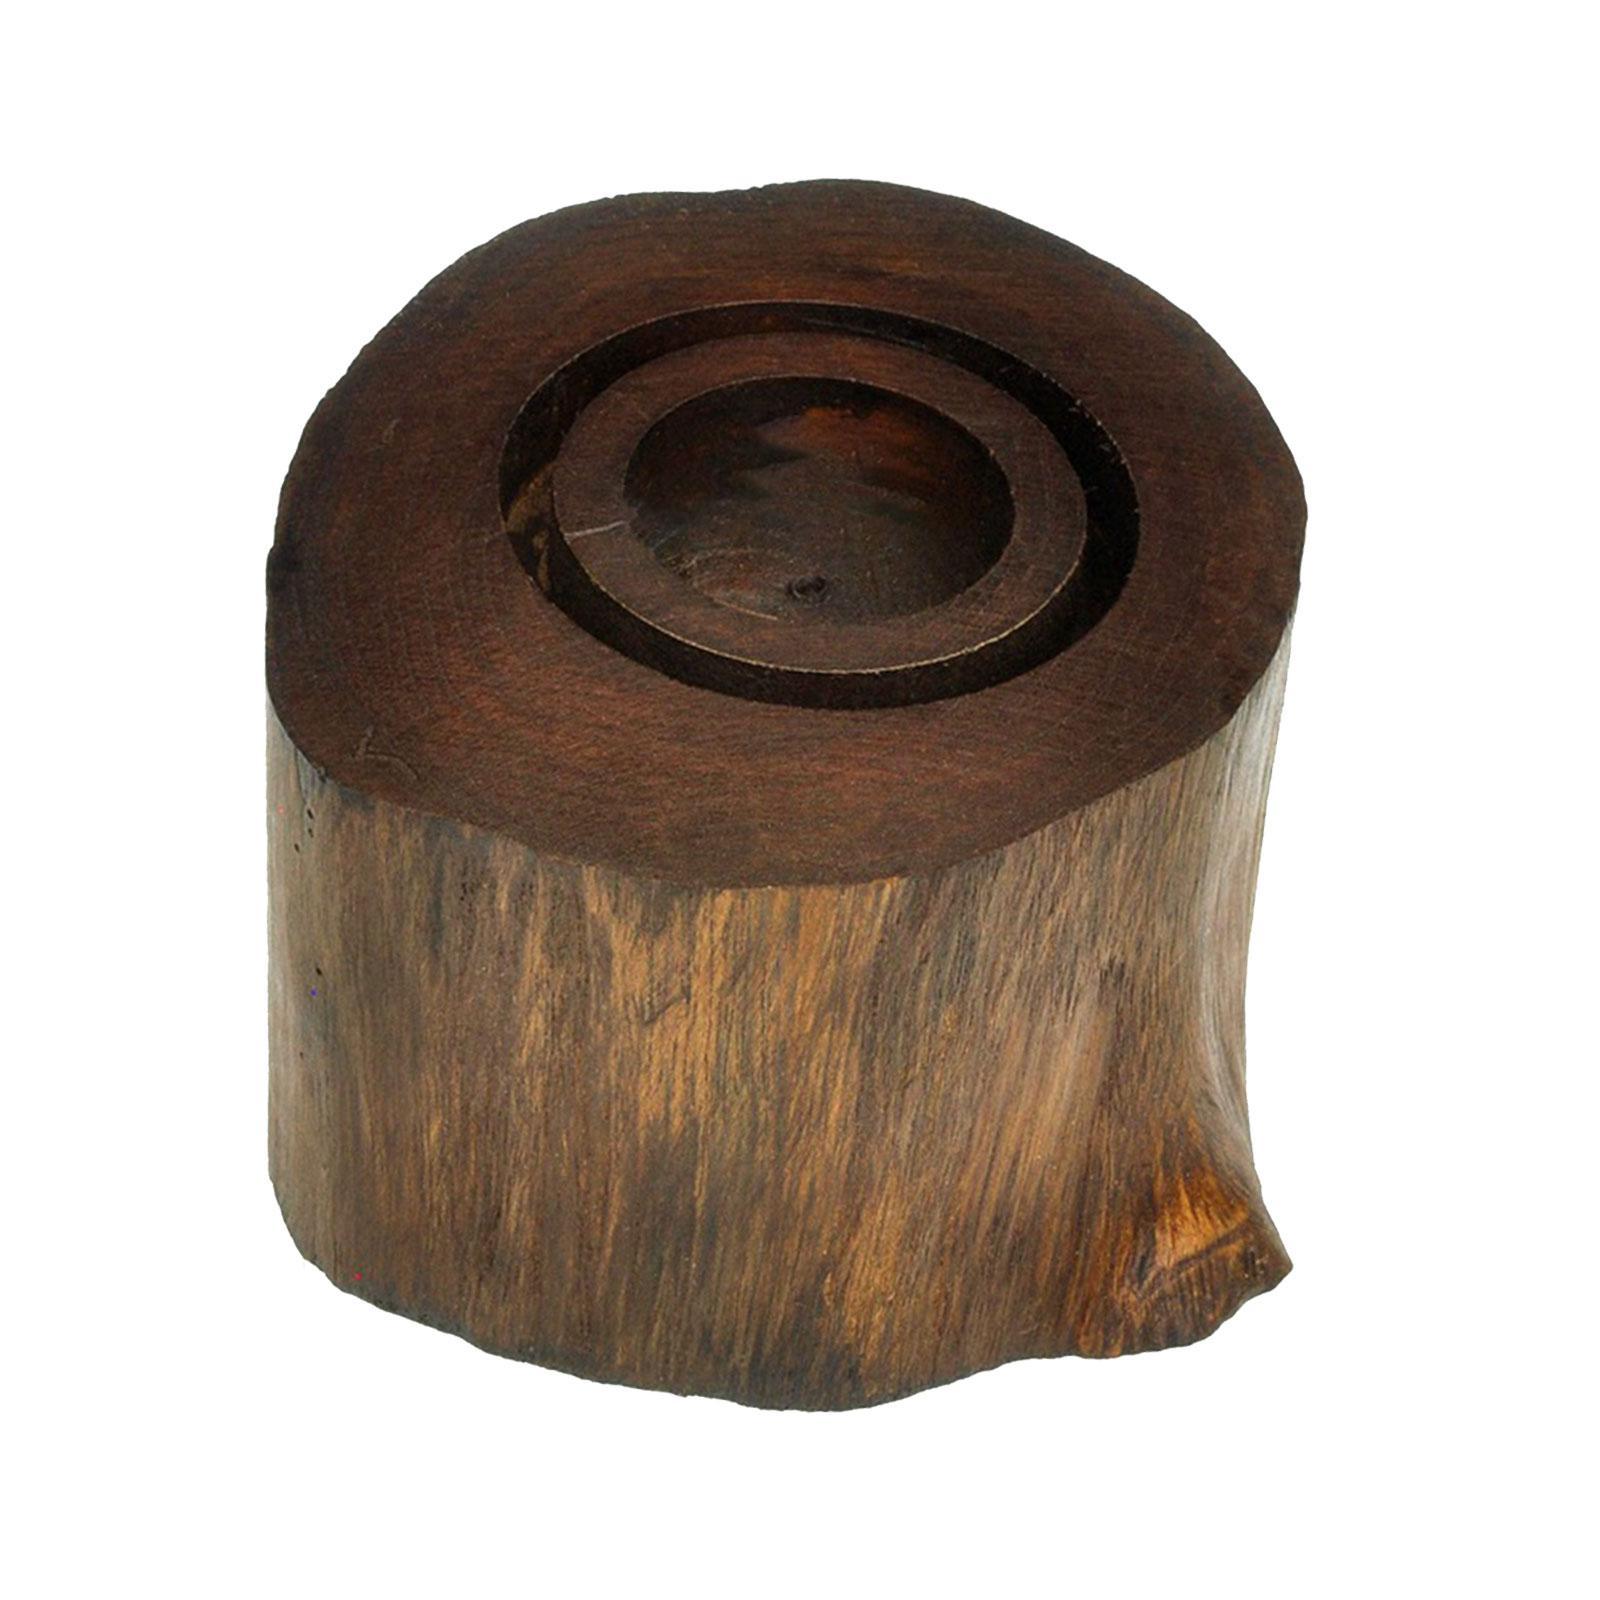 Wooden Candle Holder Candlestick Ornament Retro Style Tea Light Holders